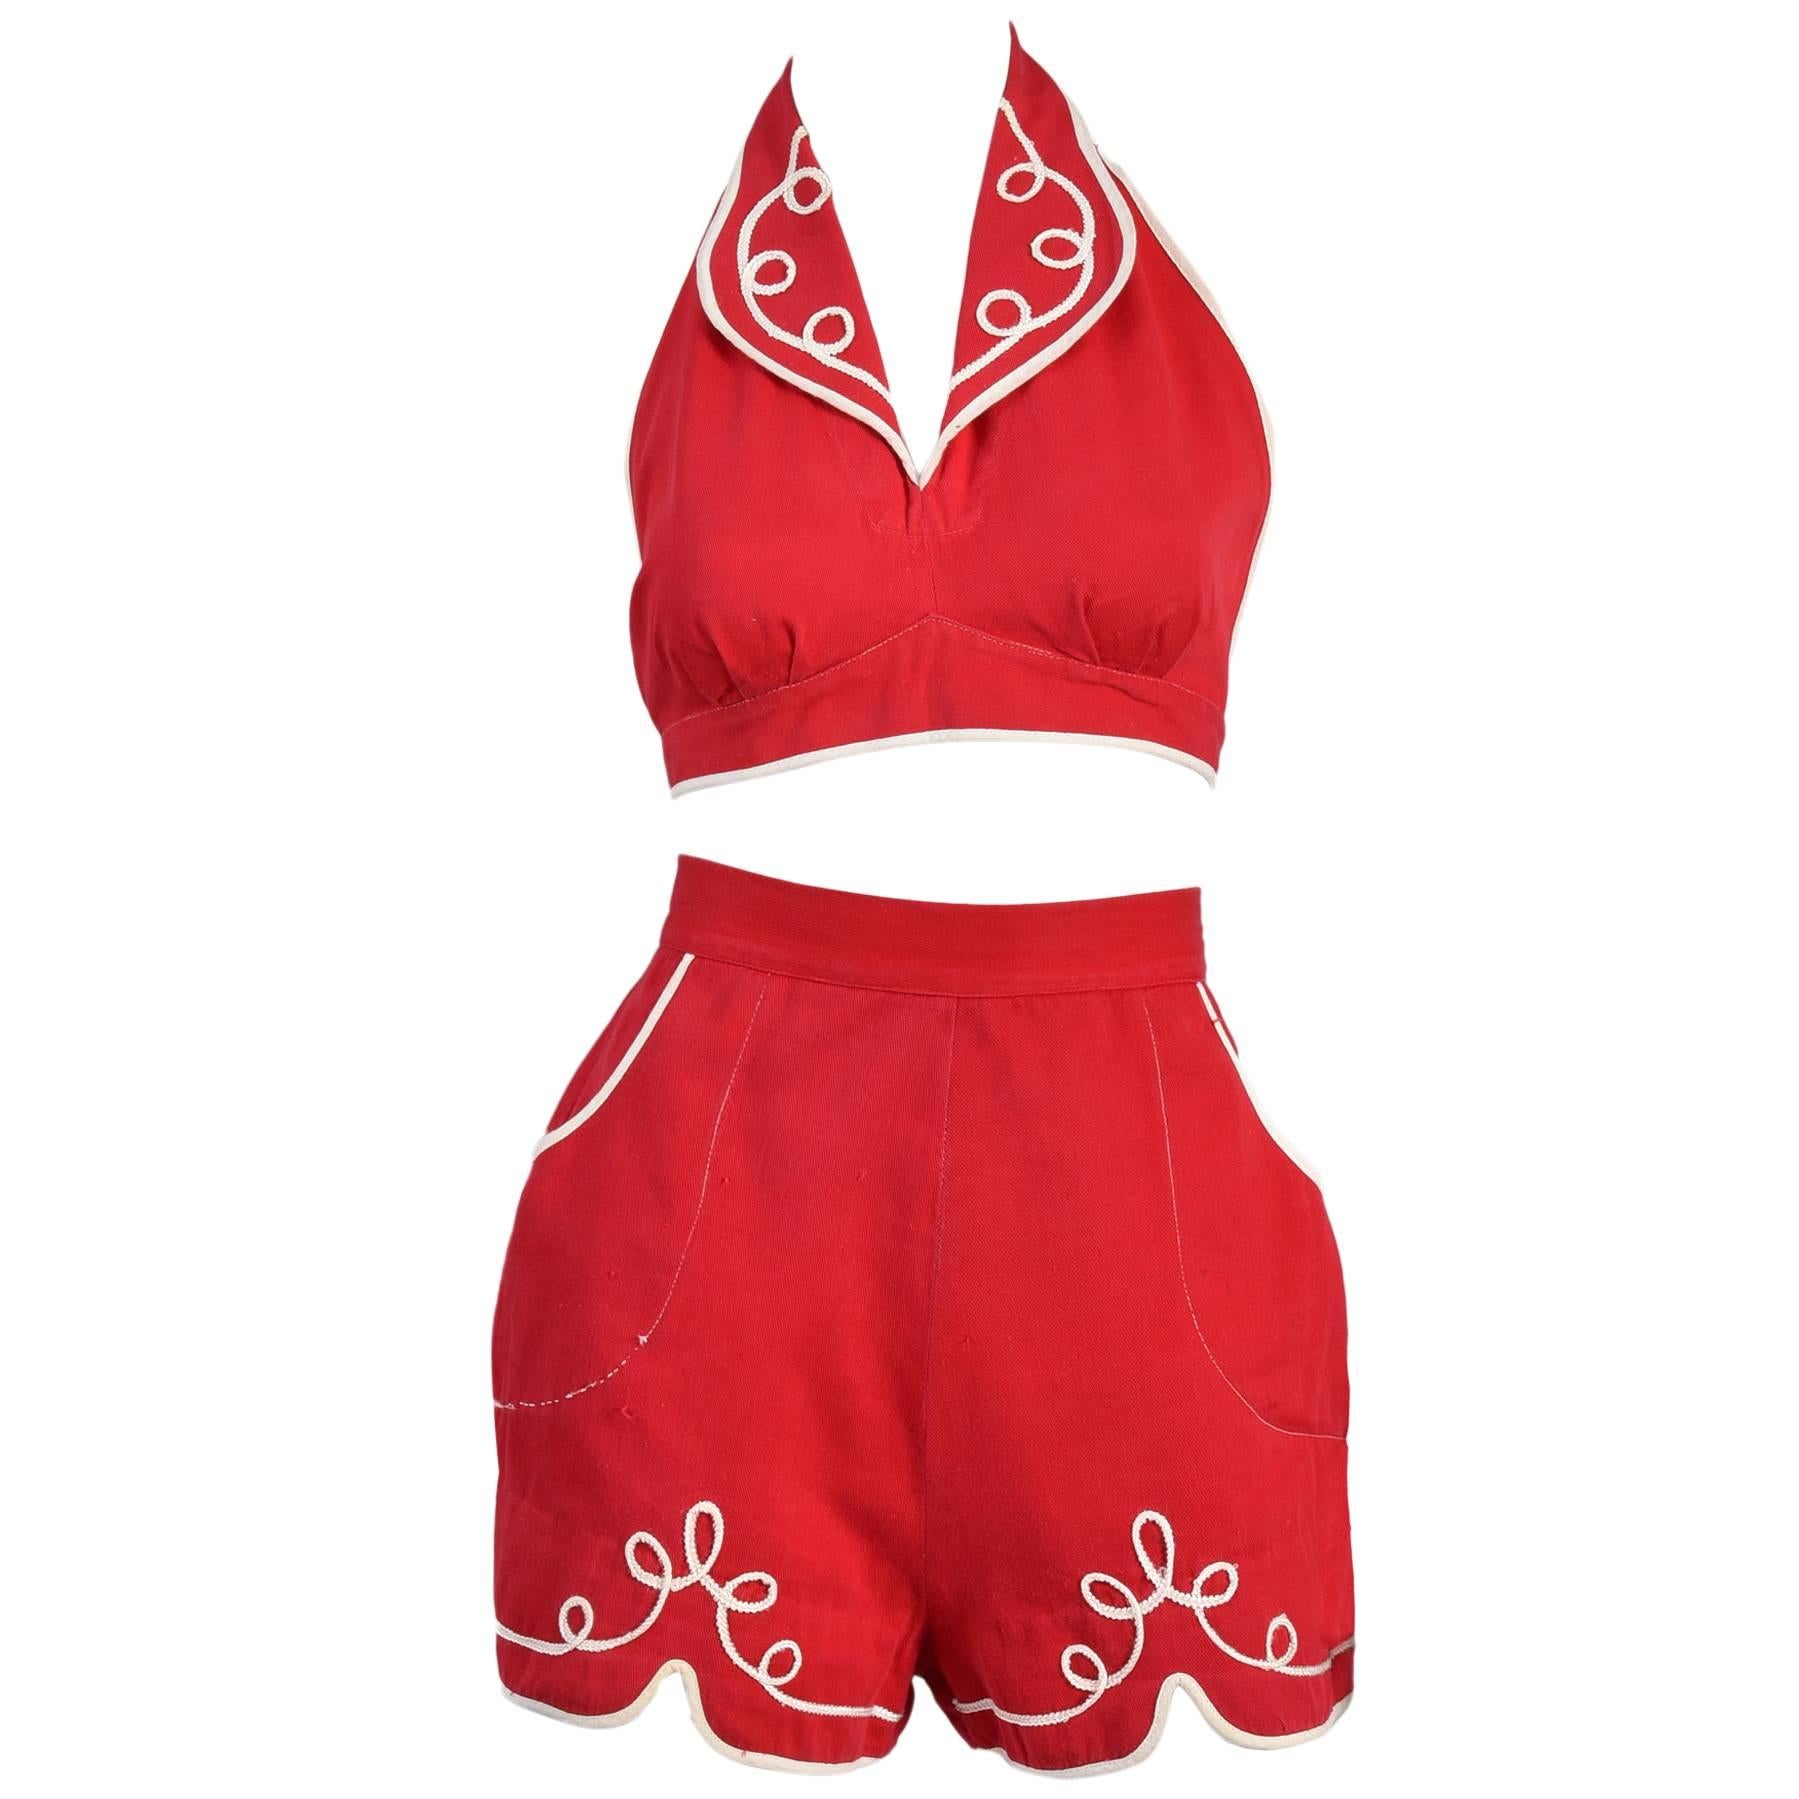 1940s 2 Piece Red Play Suit with White Trim For Sale